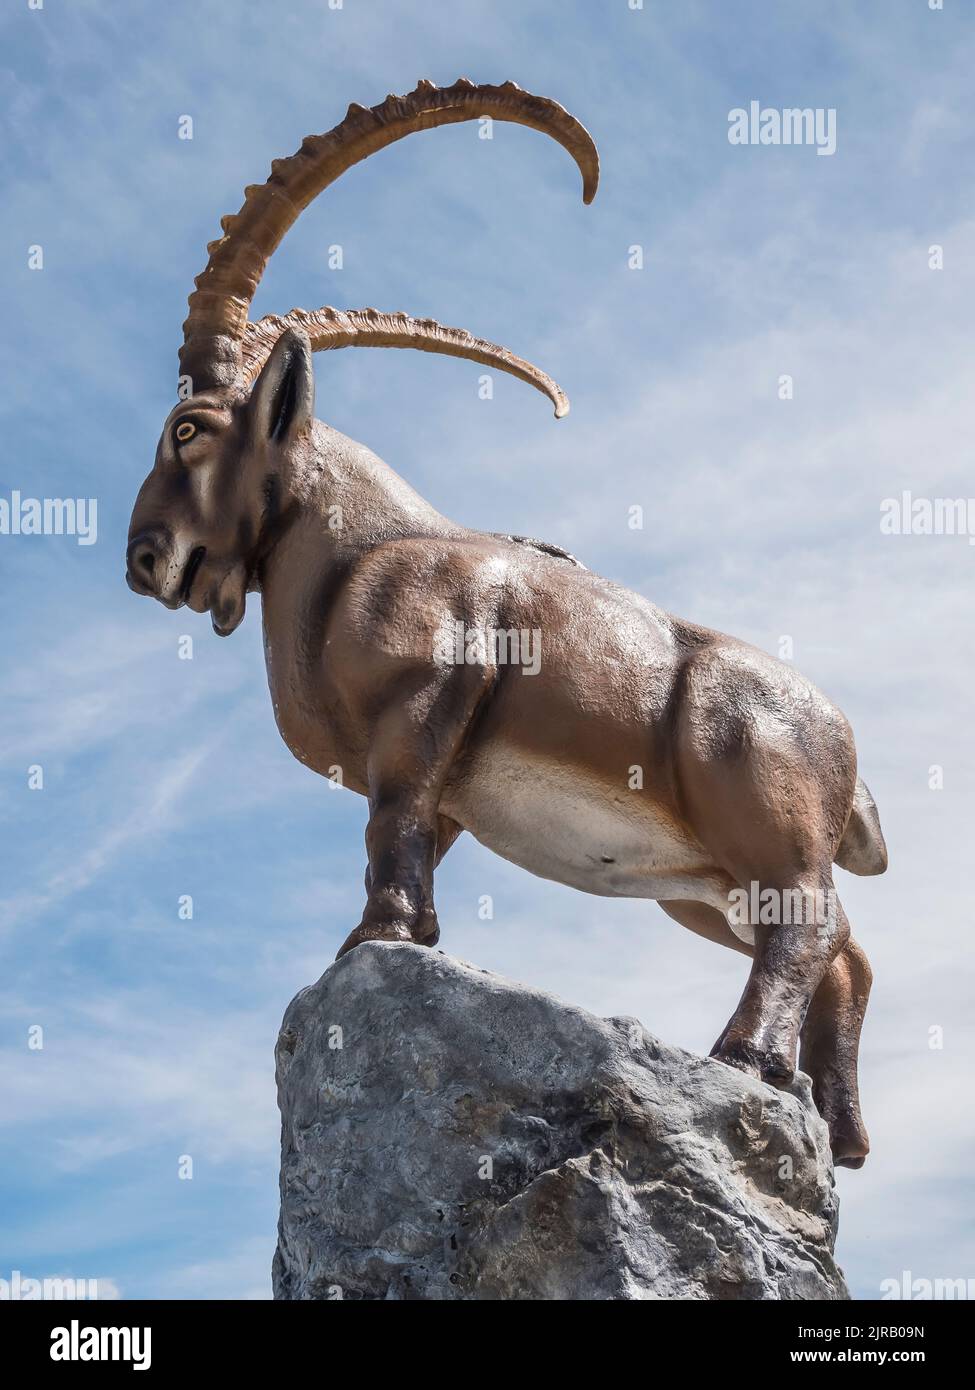 Sculpture of the Ibex Steinbok antelope at the Penkenjoch recreational area above the town of Mayrhofen in the Zillertal Alps of the Austrian Tirol Stock Photo